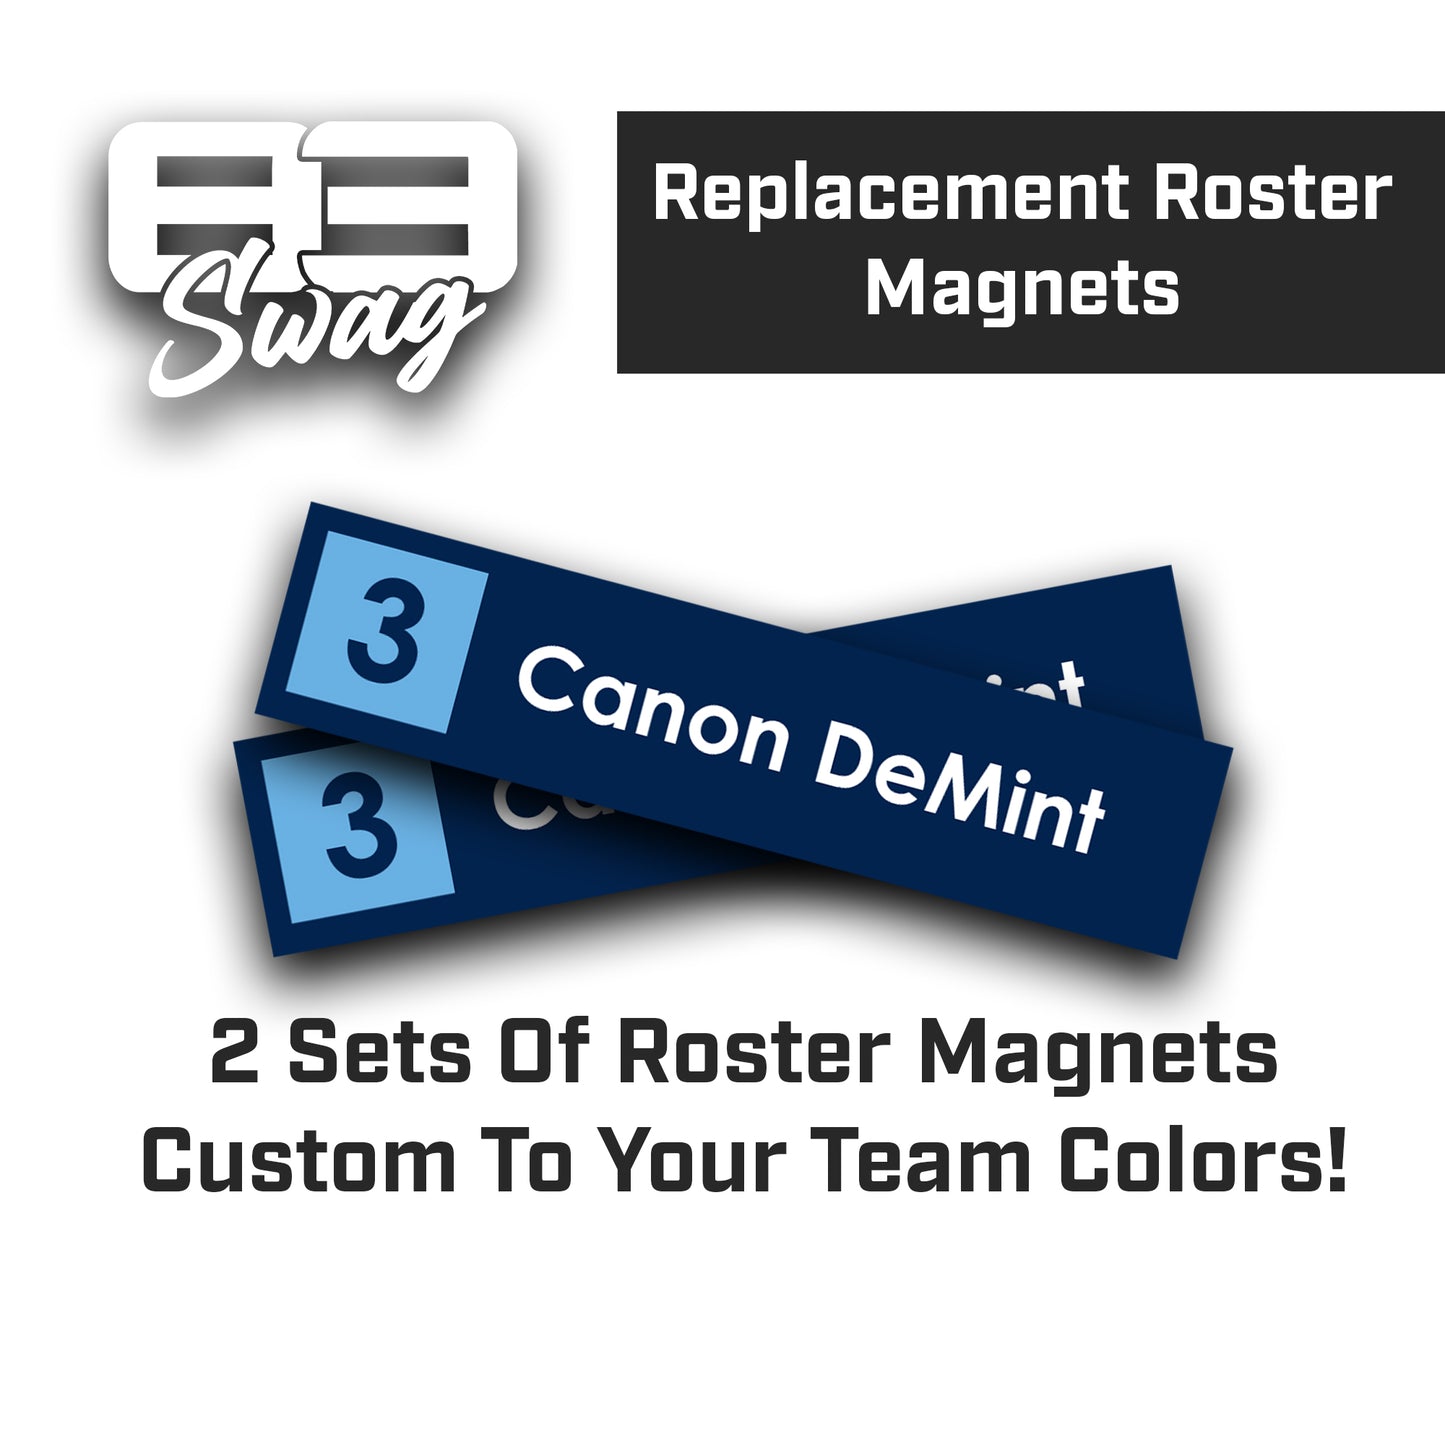 Replacement Roster Magnets